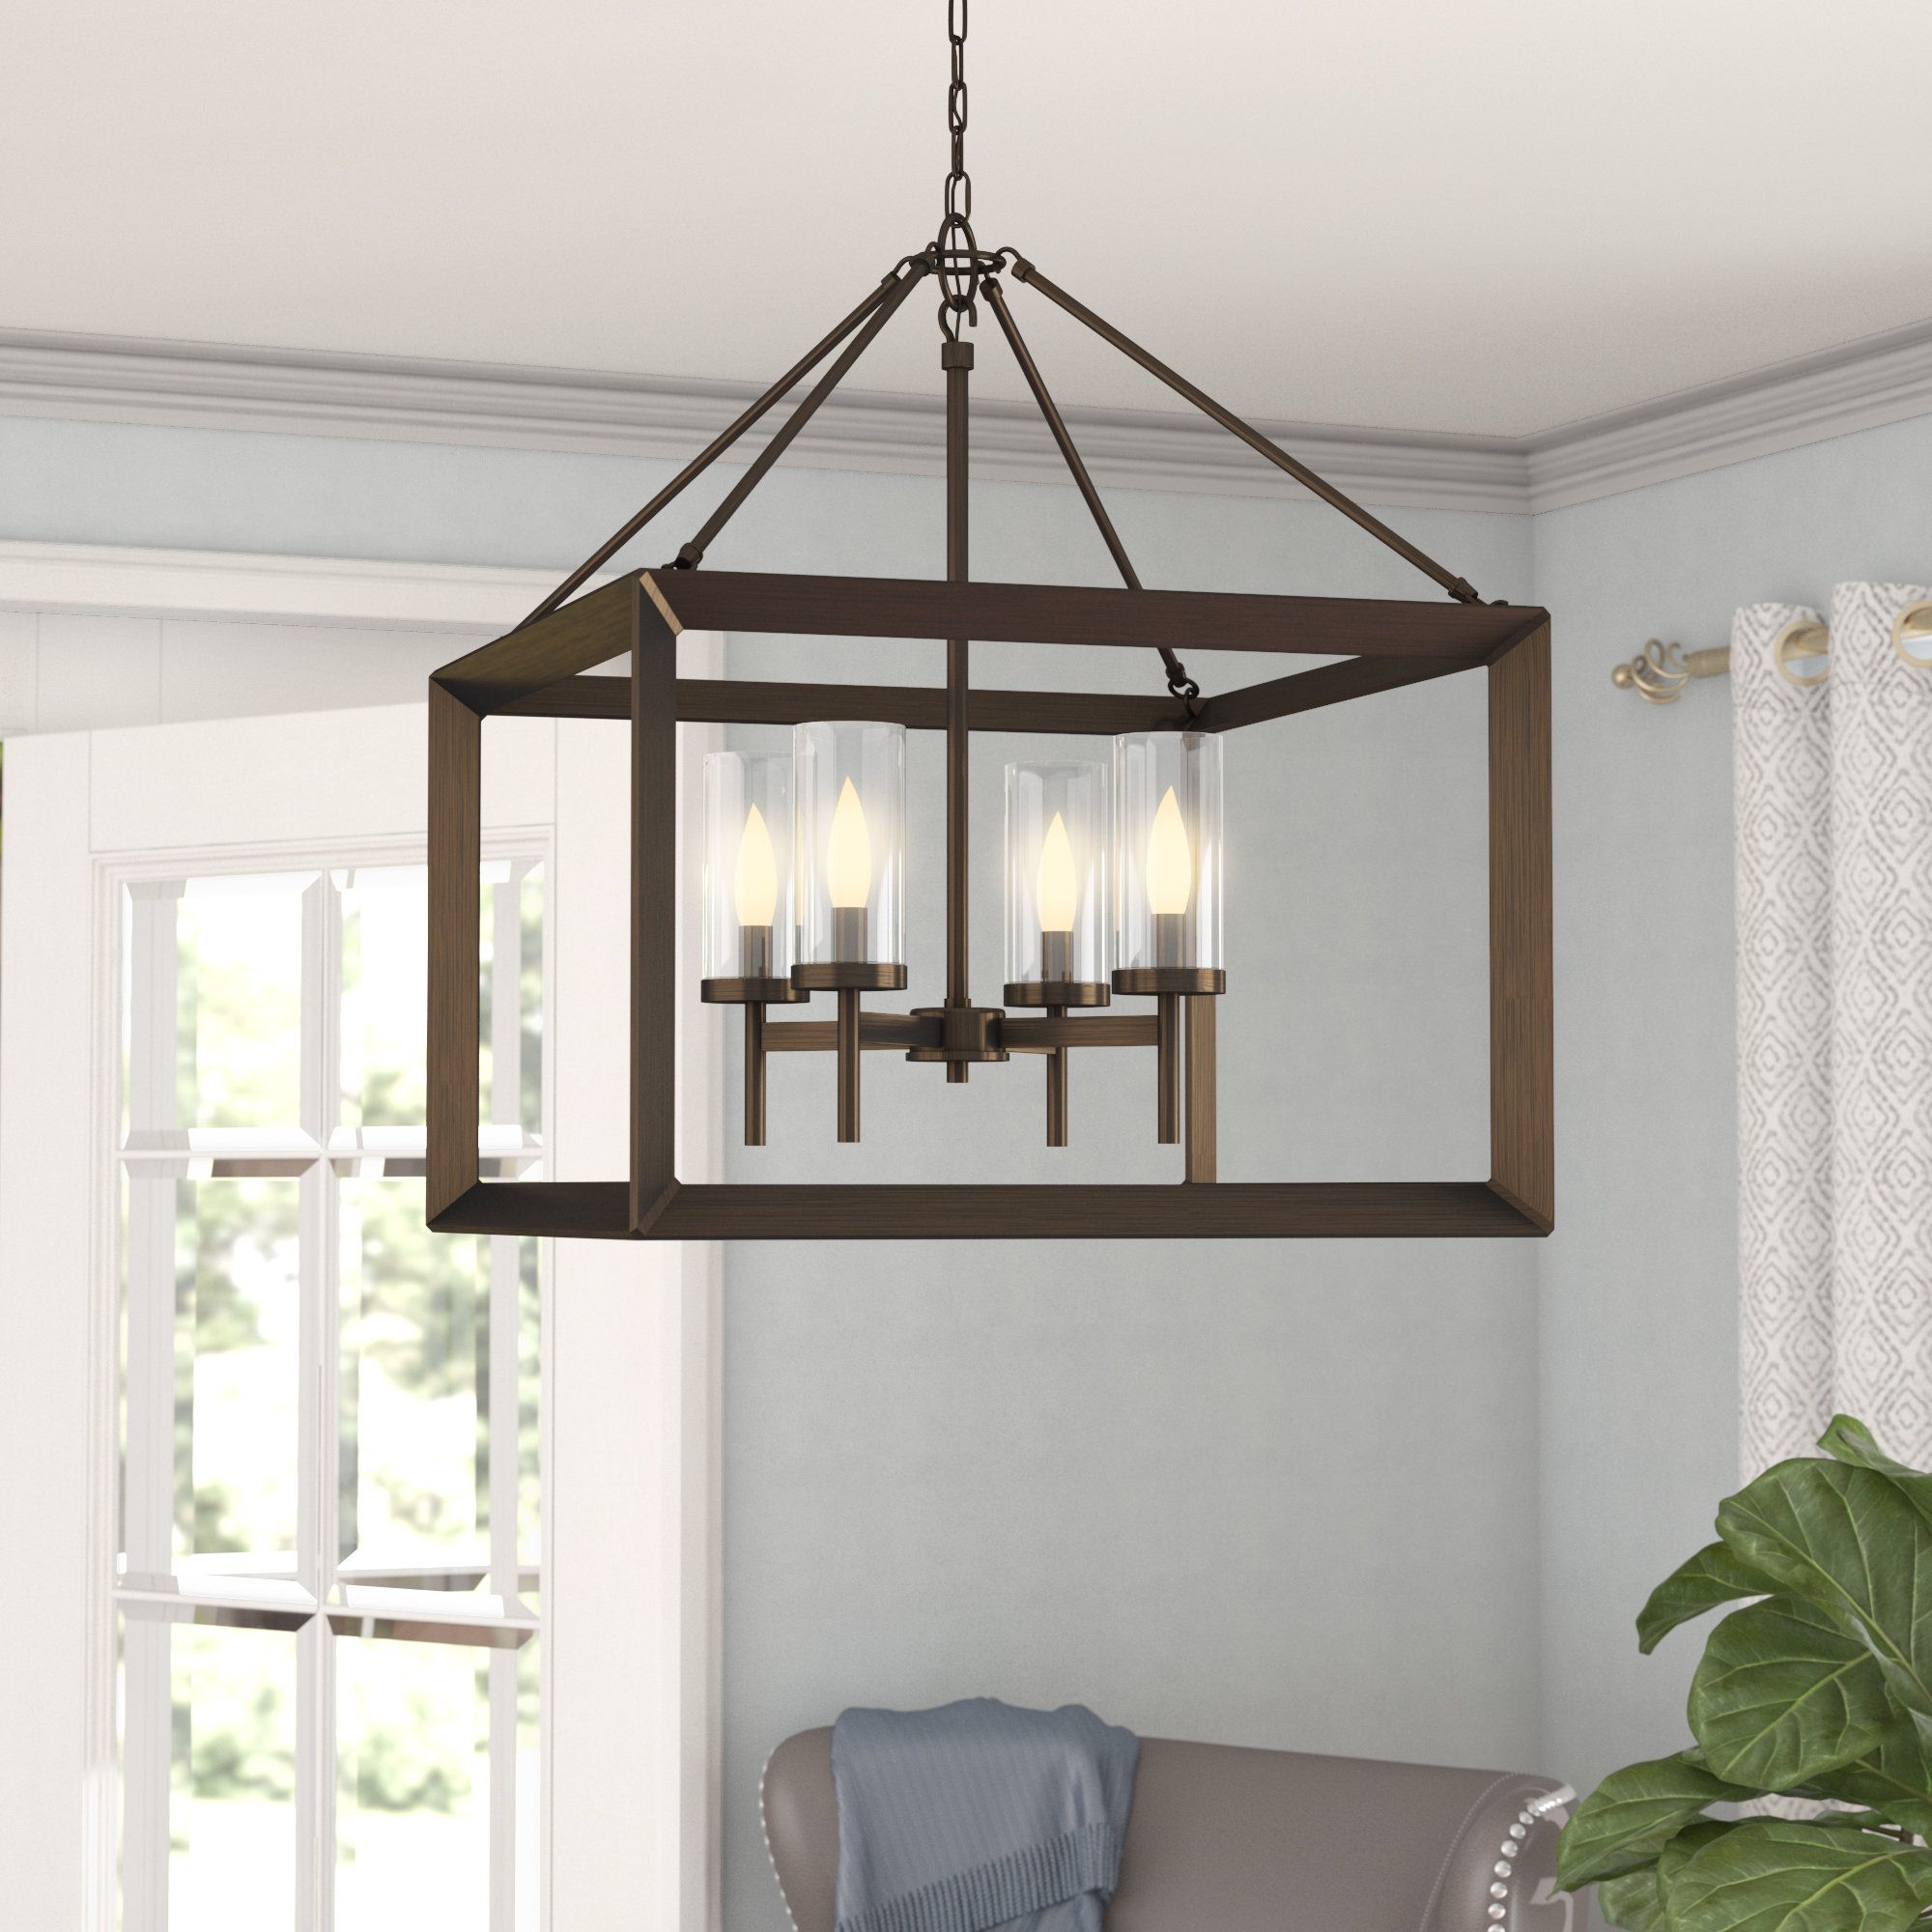 Thorne 4 Light Lantern Rectangle Pendant With Regard To Thorne 6 Light Lantern Square / Rectangle Pendants (View 6 of 30)